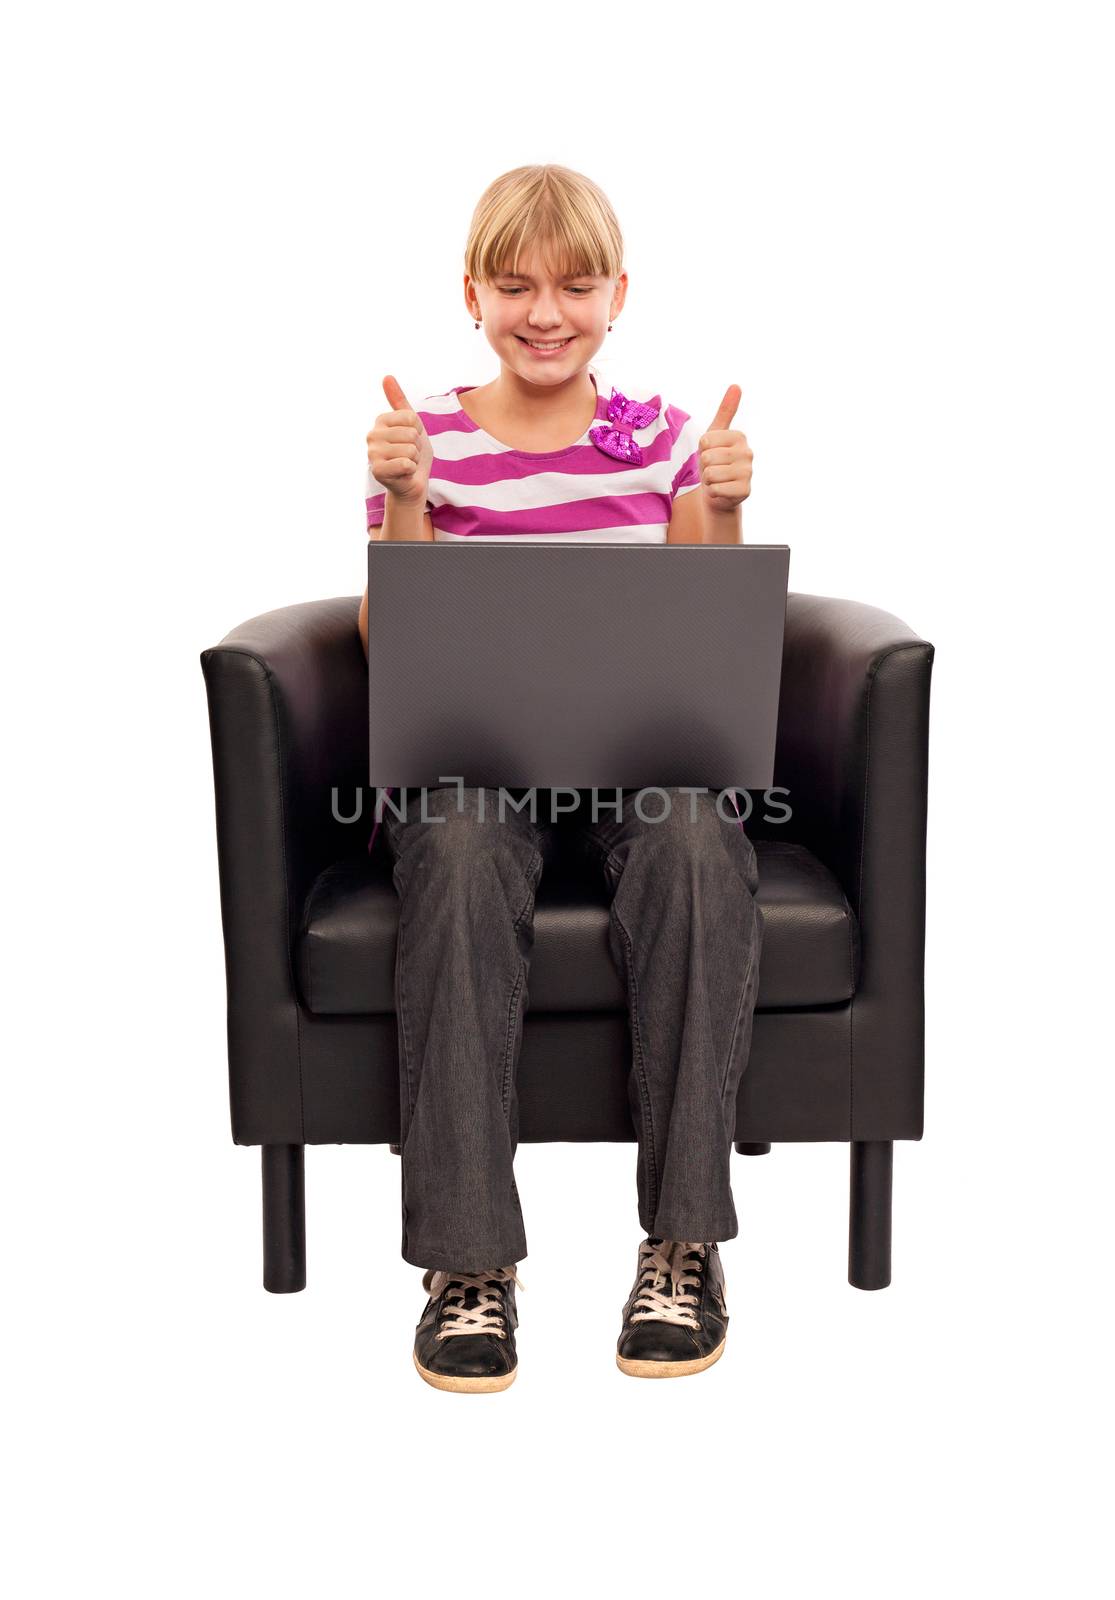 Laptop girl happy giving thumbs up success sign sitting at computer PC with excited face expression. Beautiful smiling cheerful Caucasian student girl on white background.